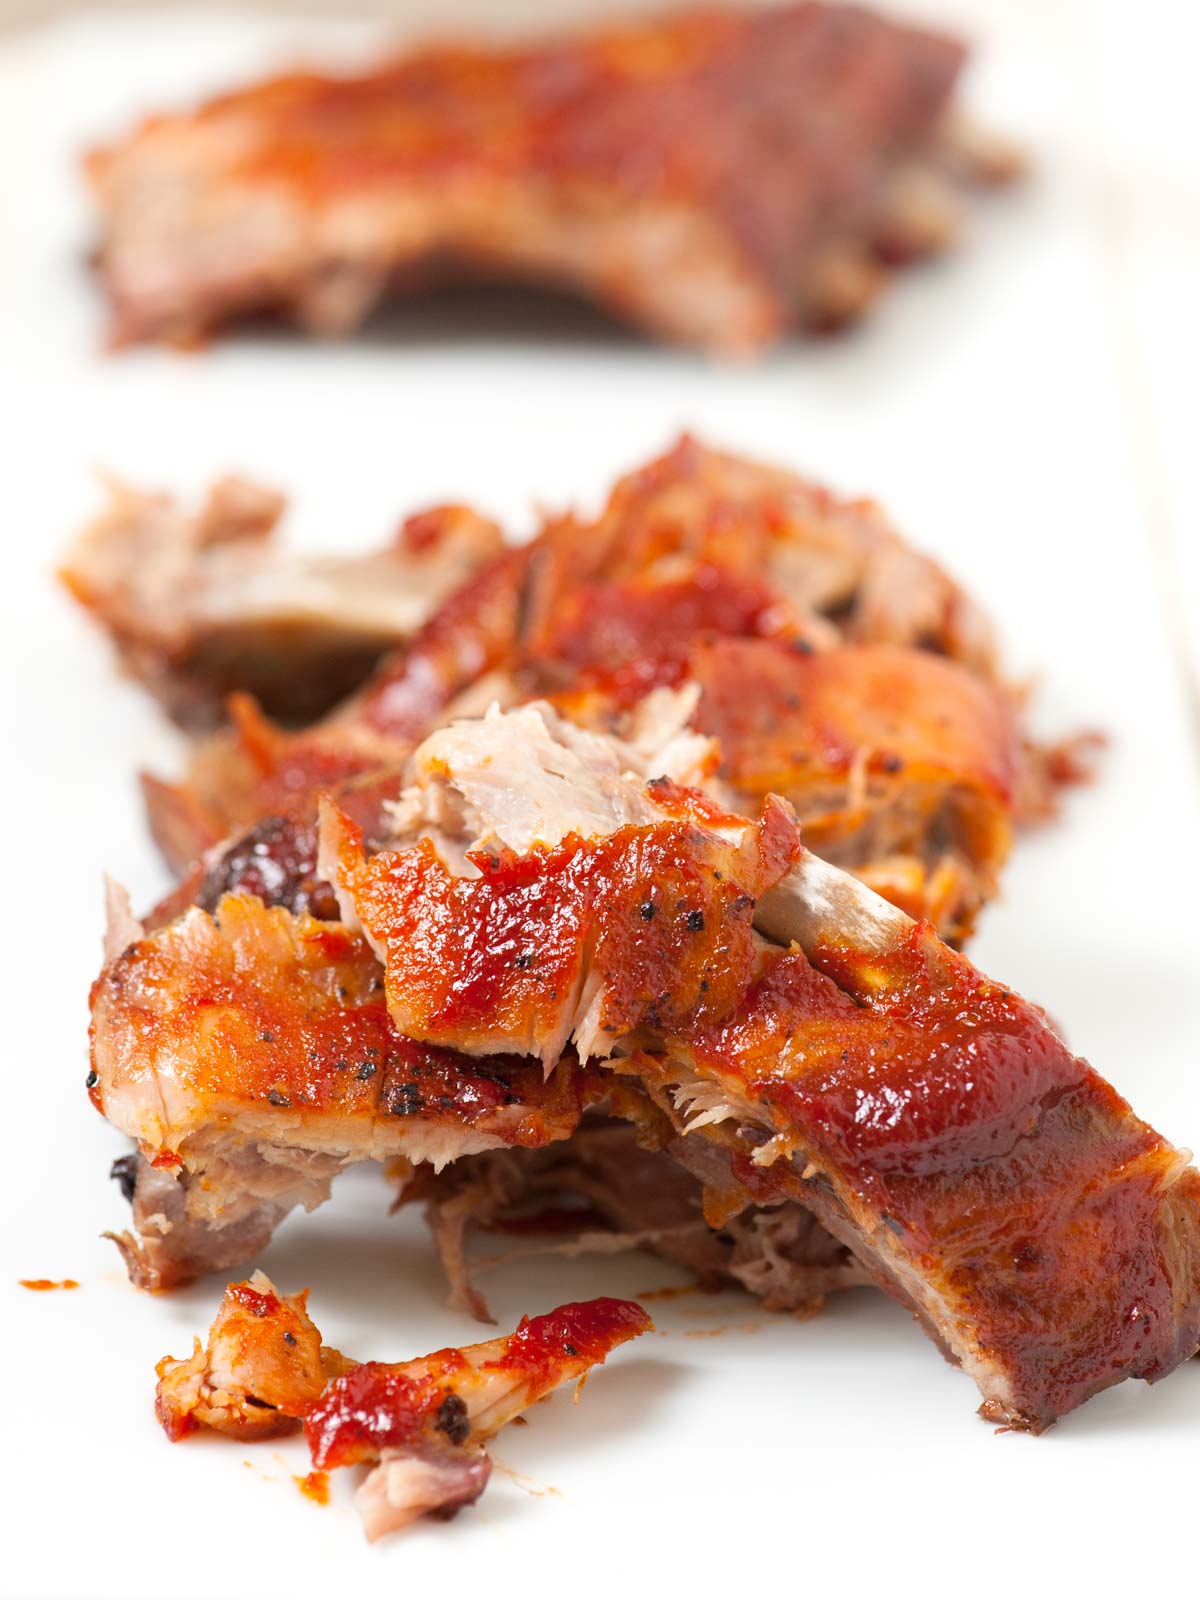 Easy, Fall-Off-The-Bone Oven Baked Ribs Recipe